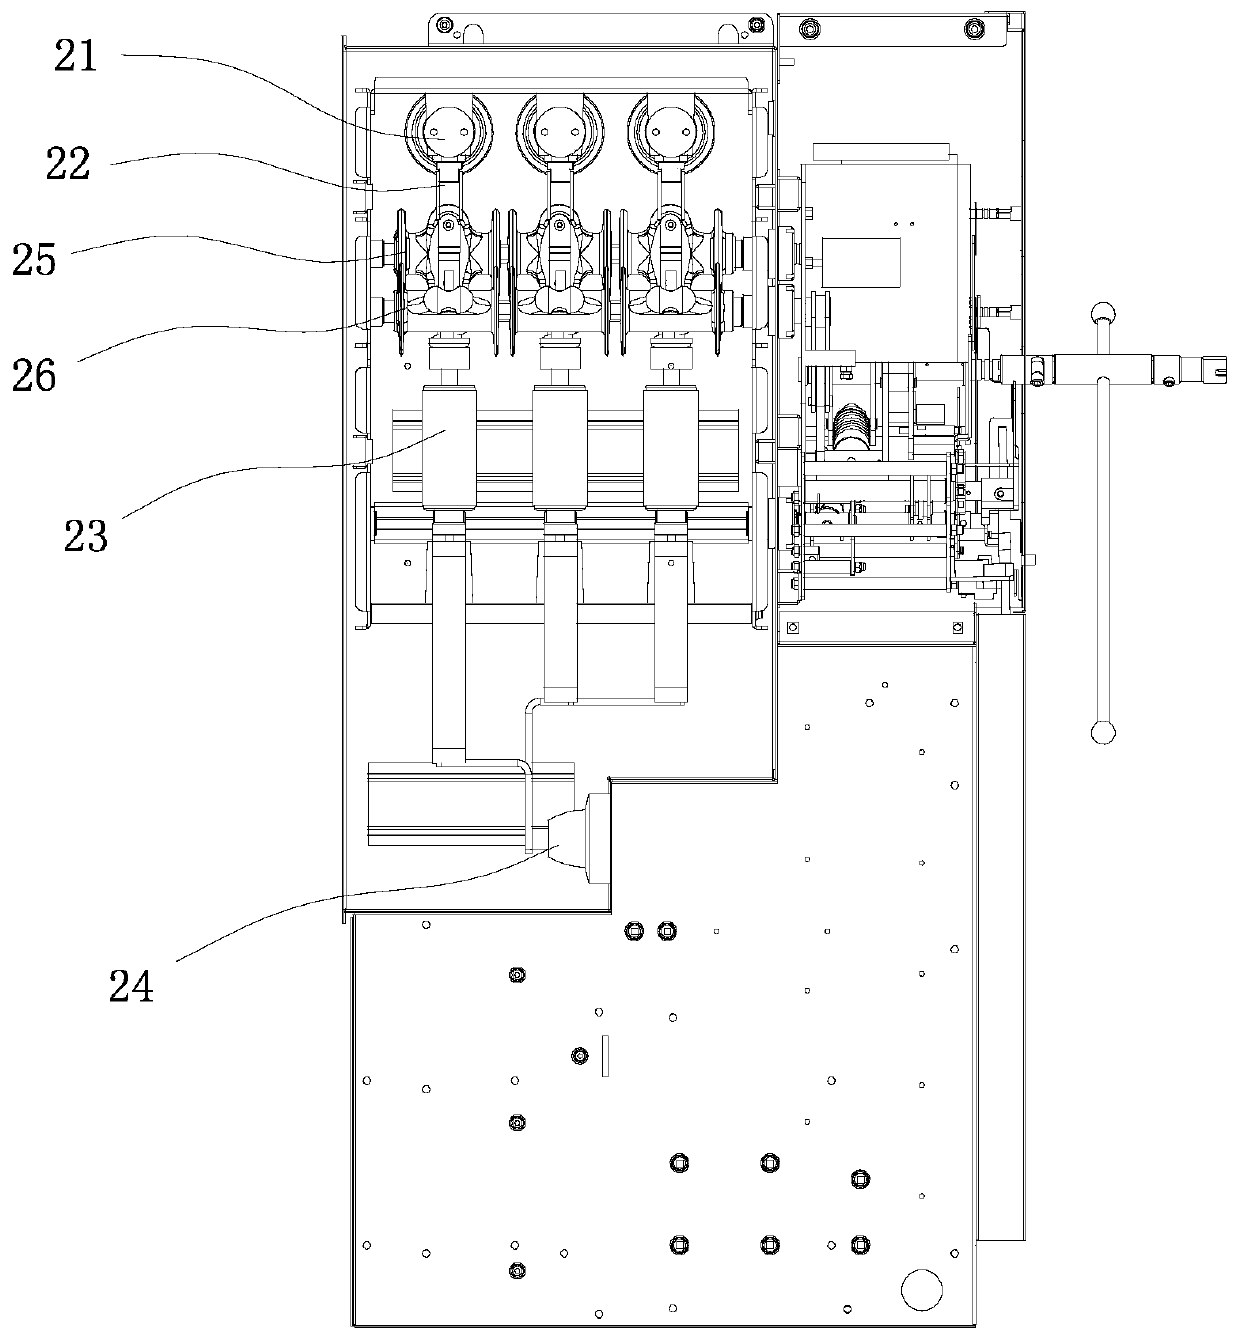 A breaking method for isolation linkage vacuum load switch